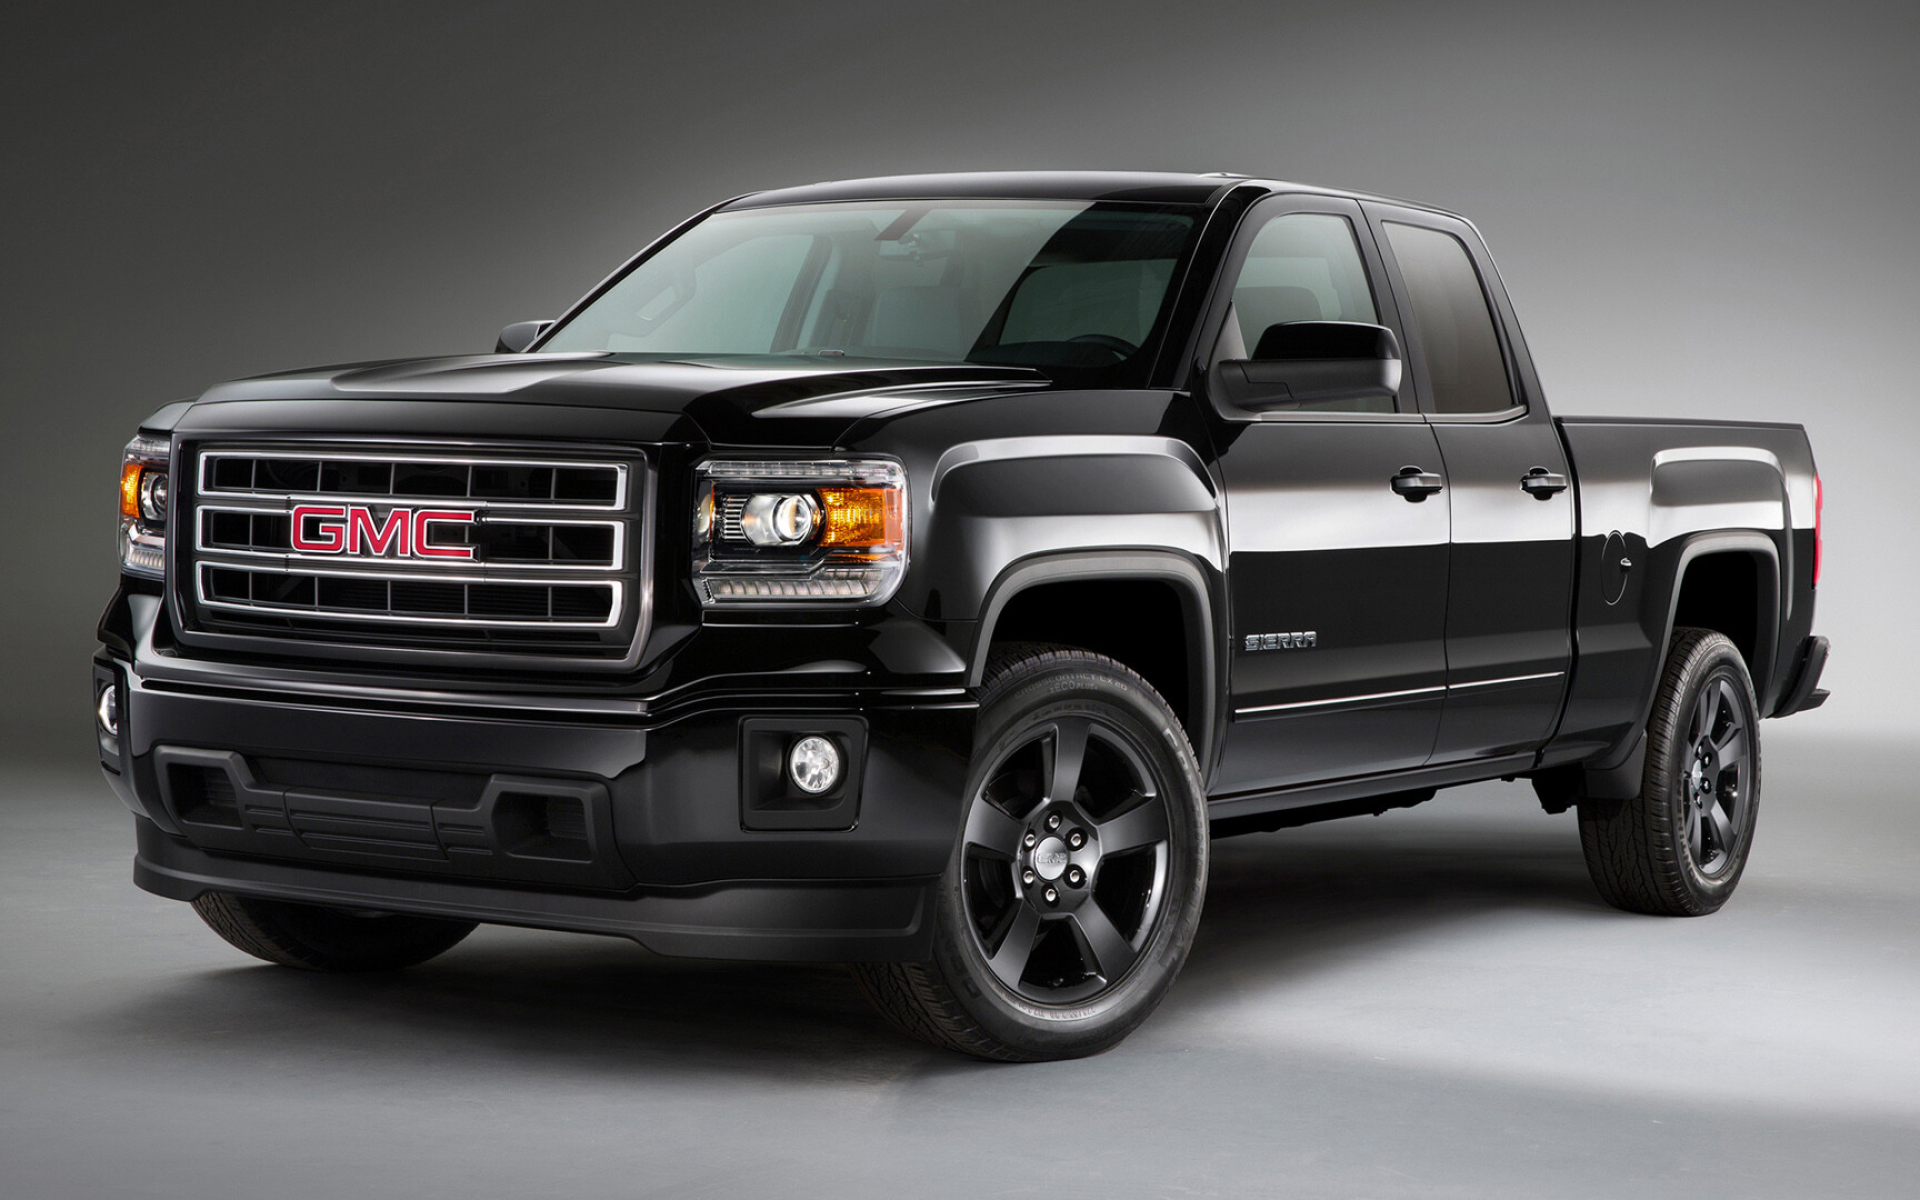 GMC Sierra: American off-road truck, Authentic materials and thoughtfully crafted details. 1920x1200 HD Wallpaper.